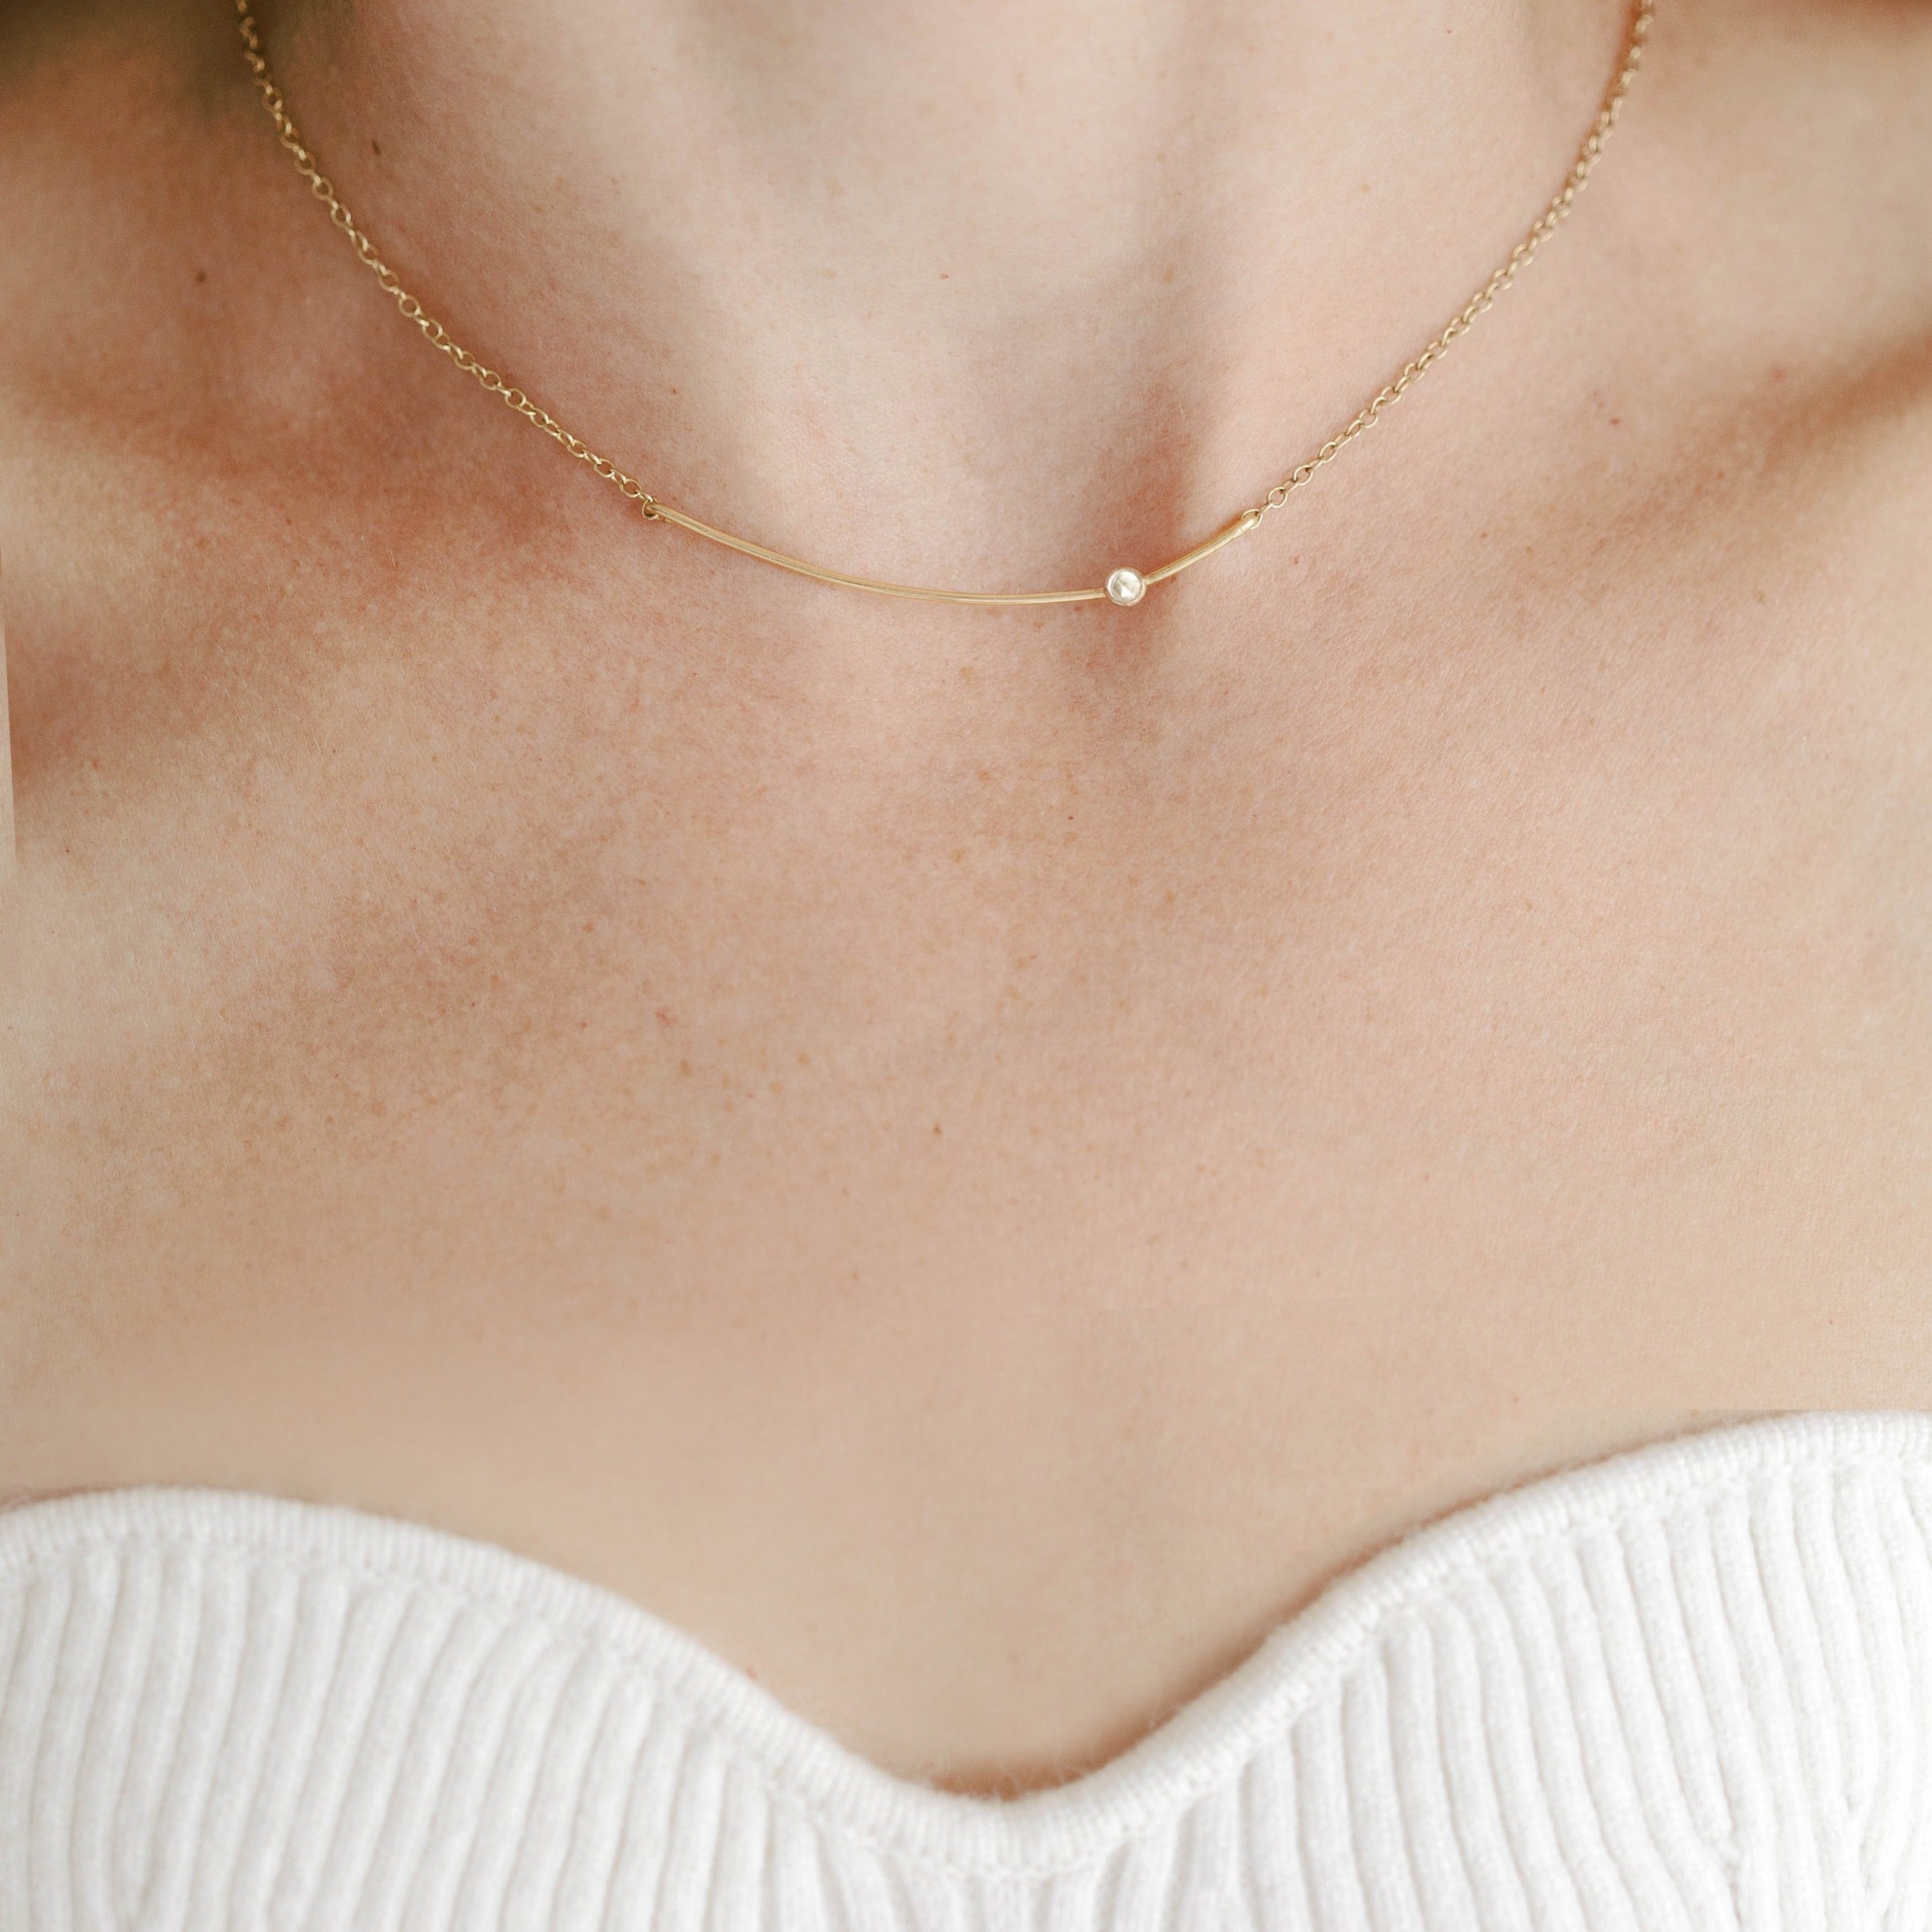 Gold curved bar necklace with white topaz gemstone